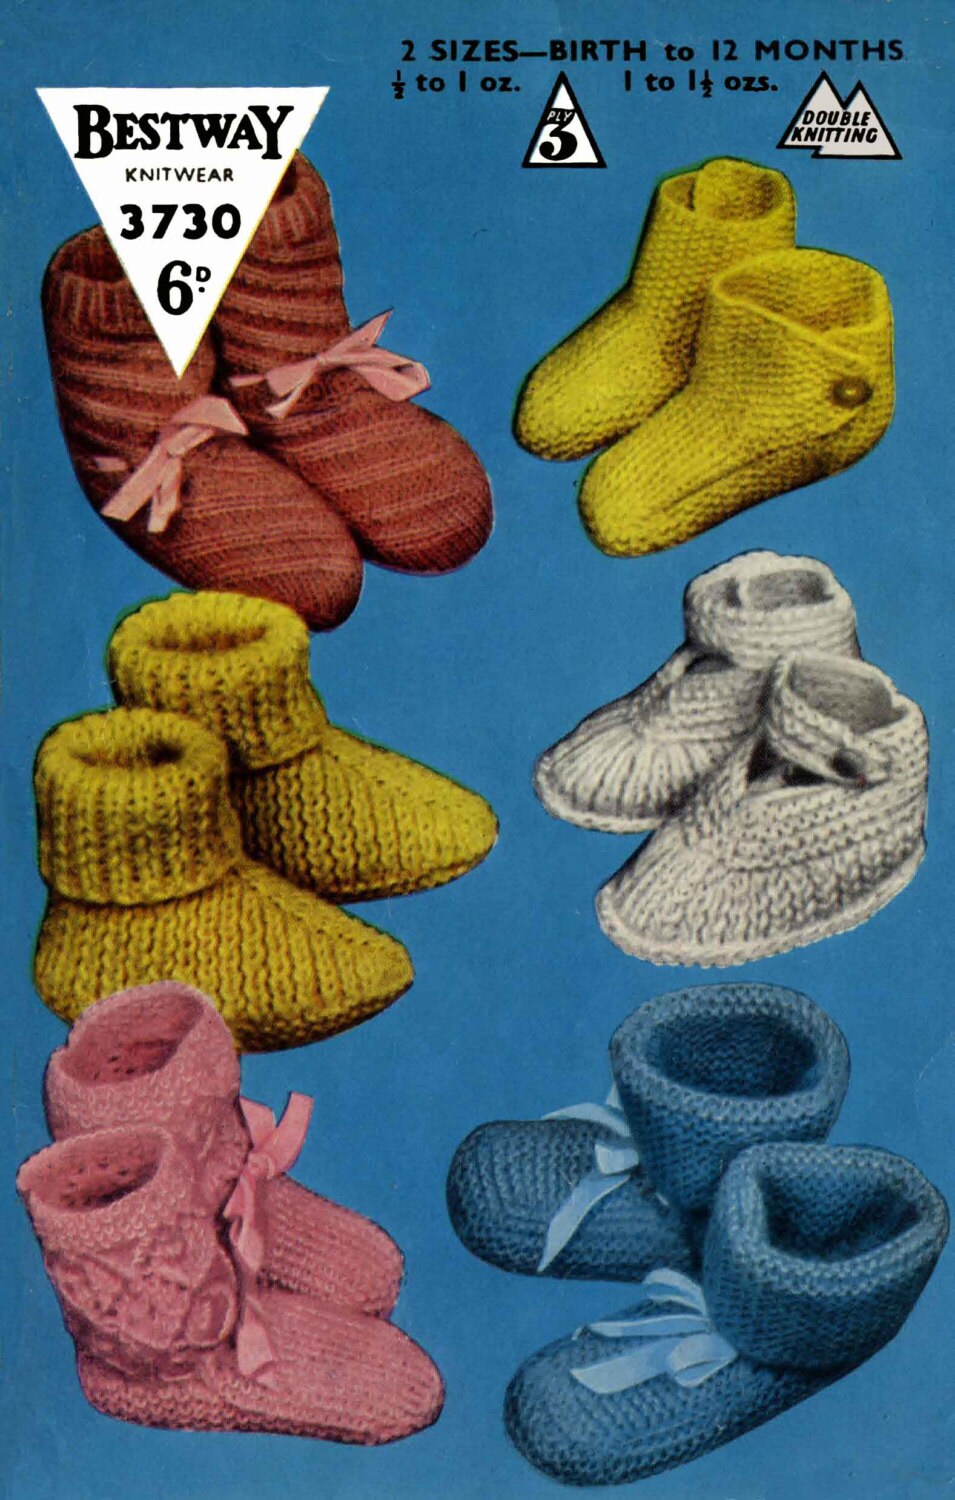 Baby Bootees and Shoes 6 Styles, Birth to 12 months, 3ply & DK, 50s Knitting Pattern, Bestway 3730